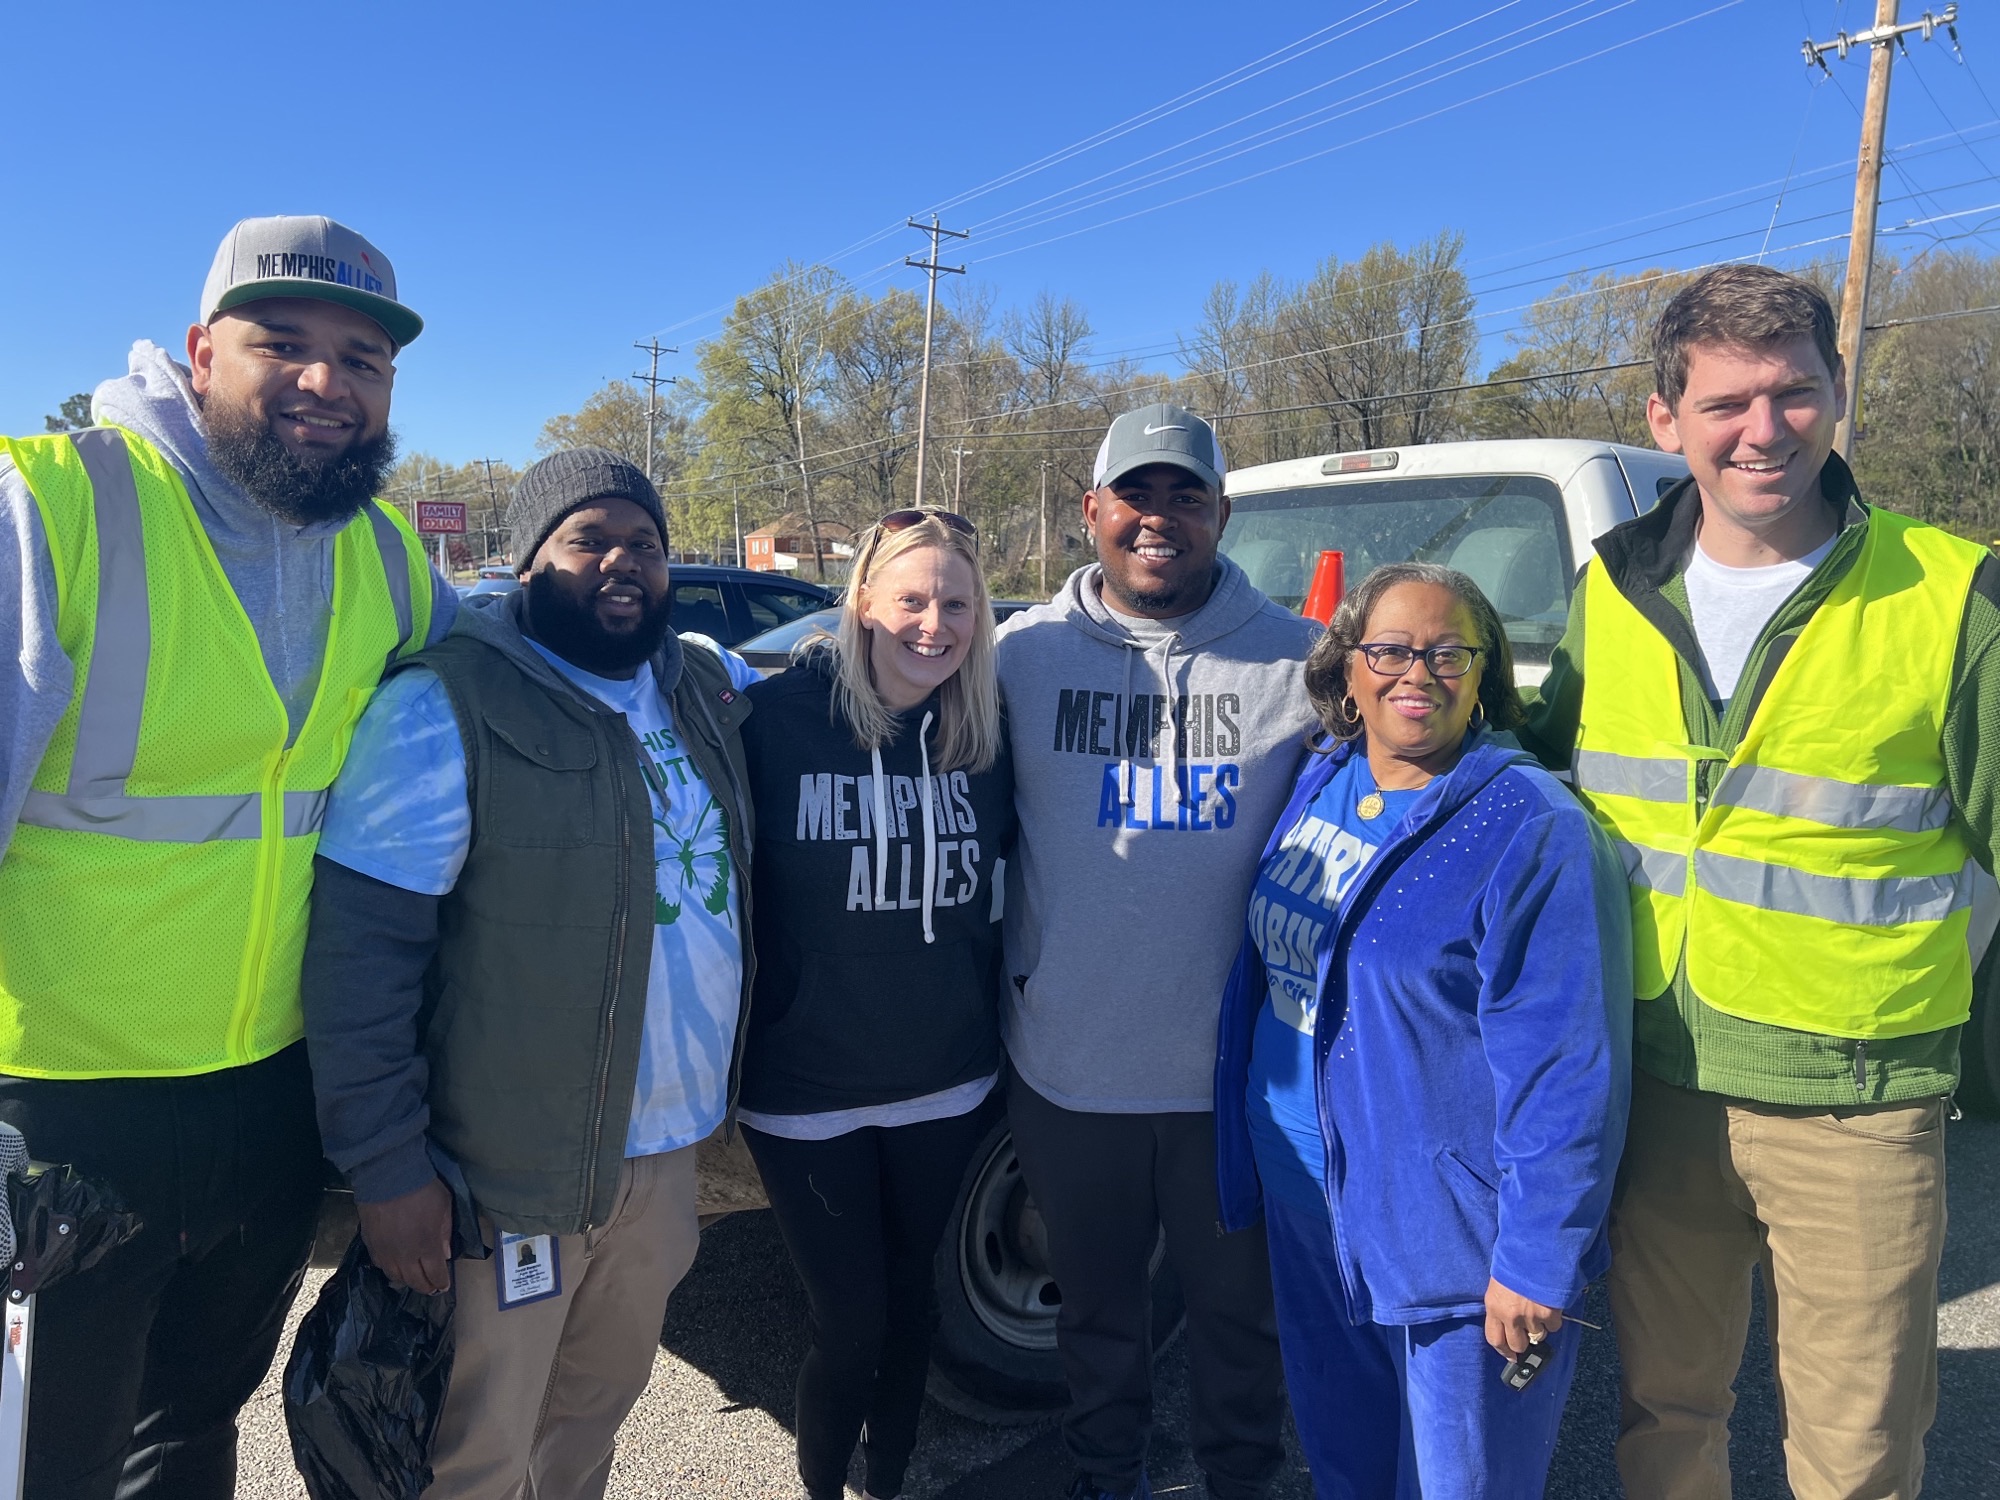 Staff from Memphis Allies and Youth Villages partnered with nearly a dozen other organizations for a Whitehaven Community Clean-Up